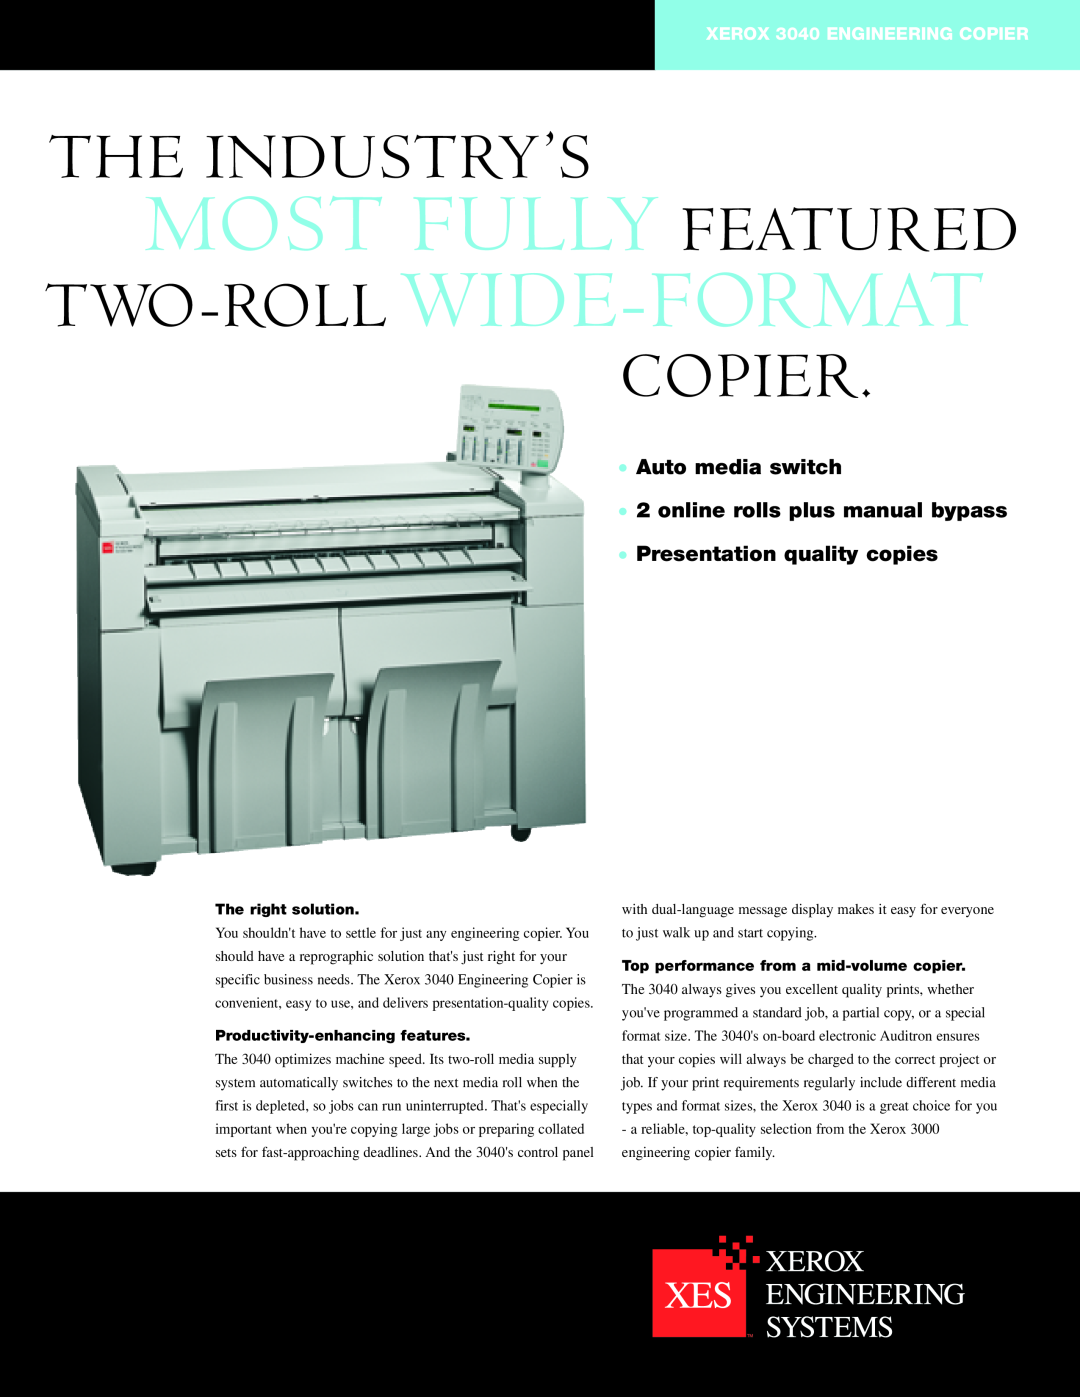 Xerox manual XEROX 3040 ENGINEERING COPIER, The right solution, Productivity-enhancing features, The Industry’S, Copier 